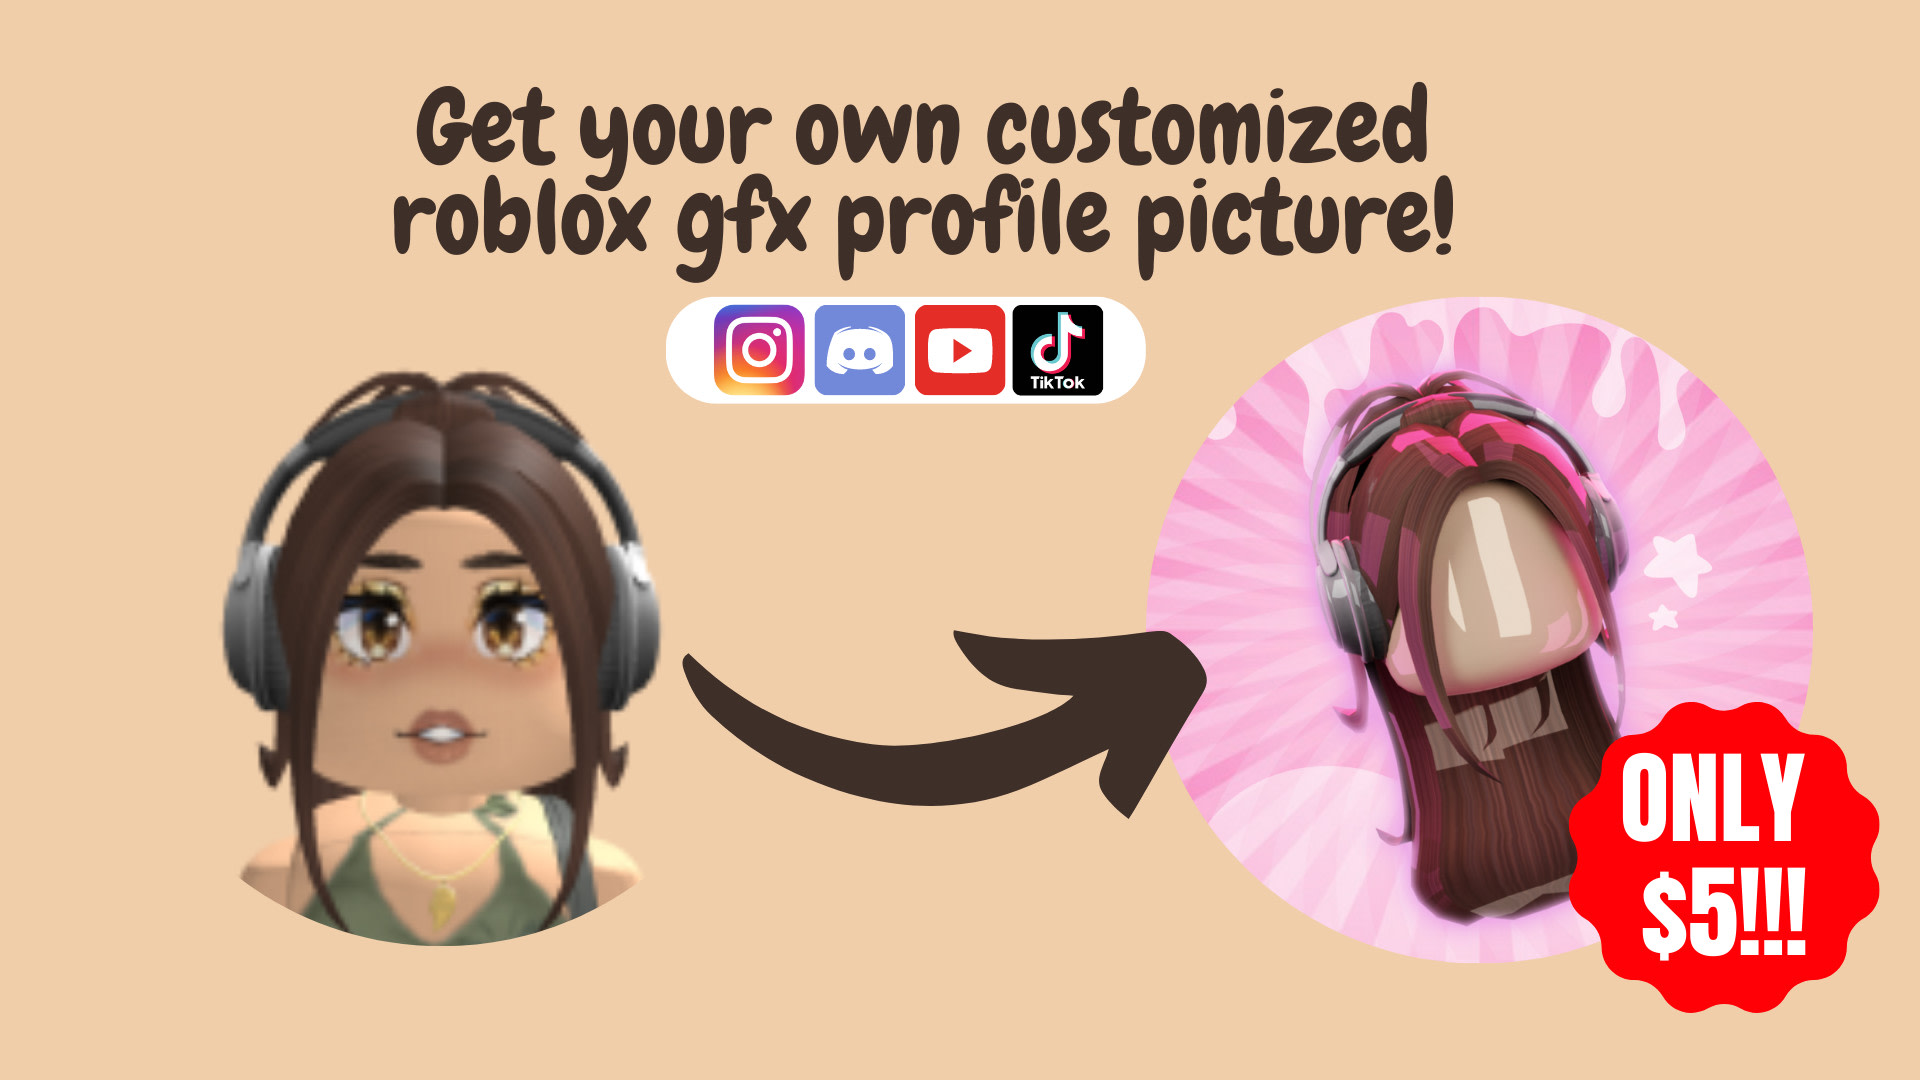 Make a roblox gfx profile picture for you in less than 24h by